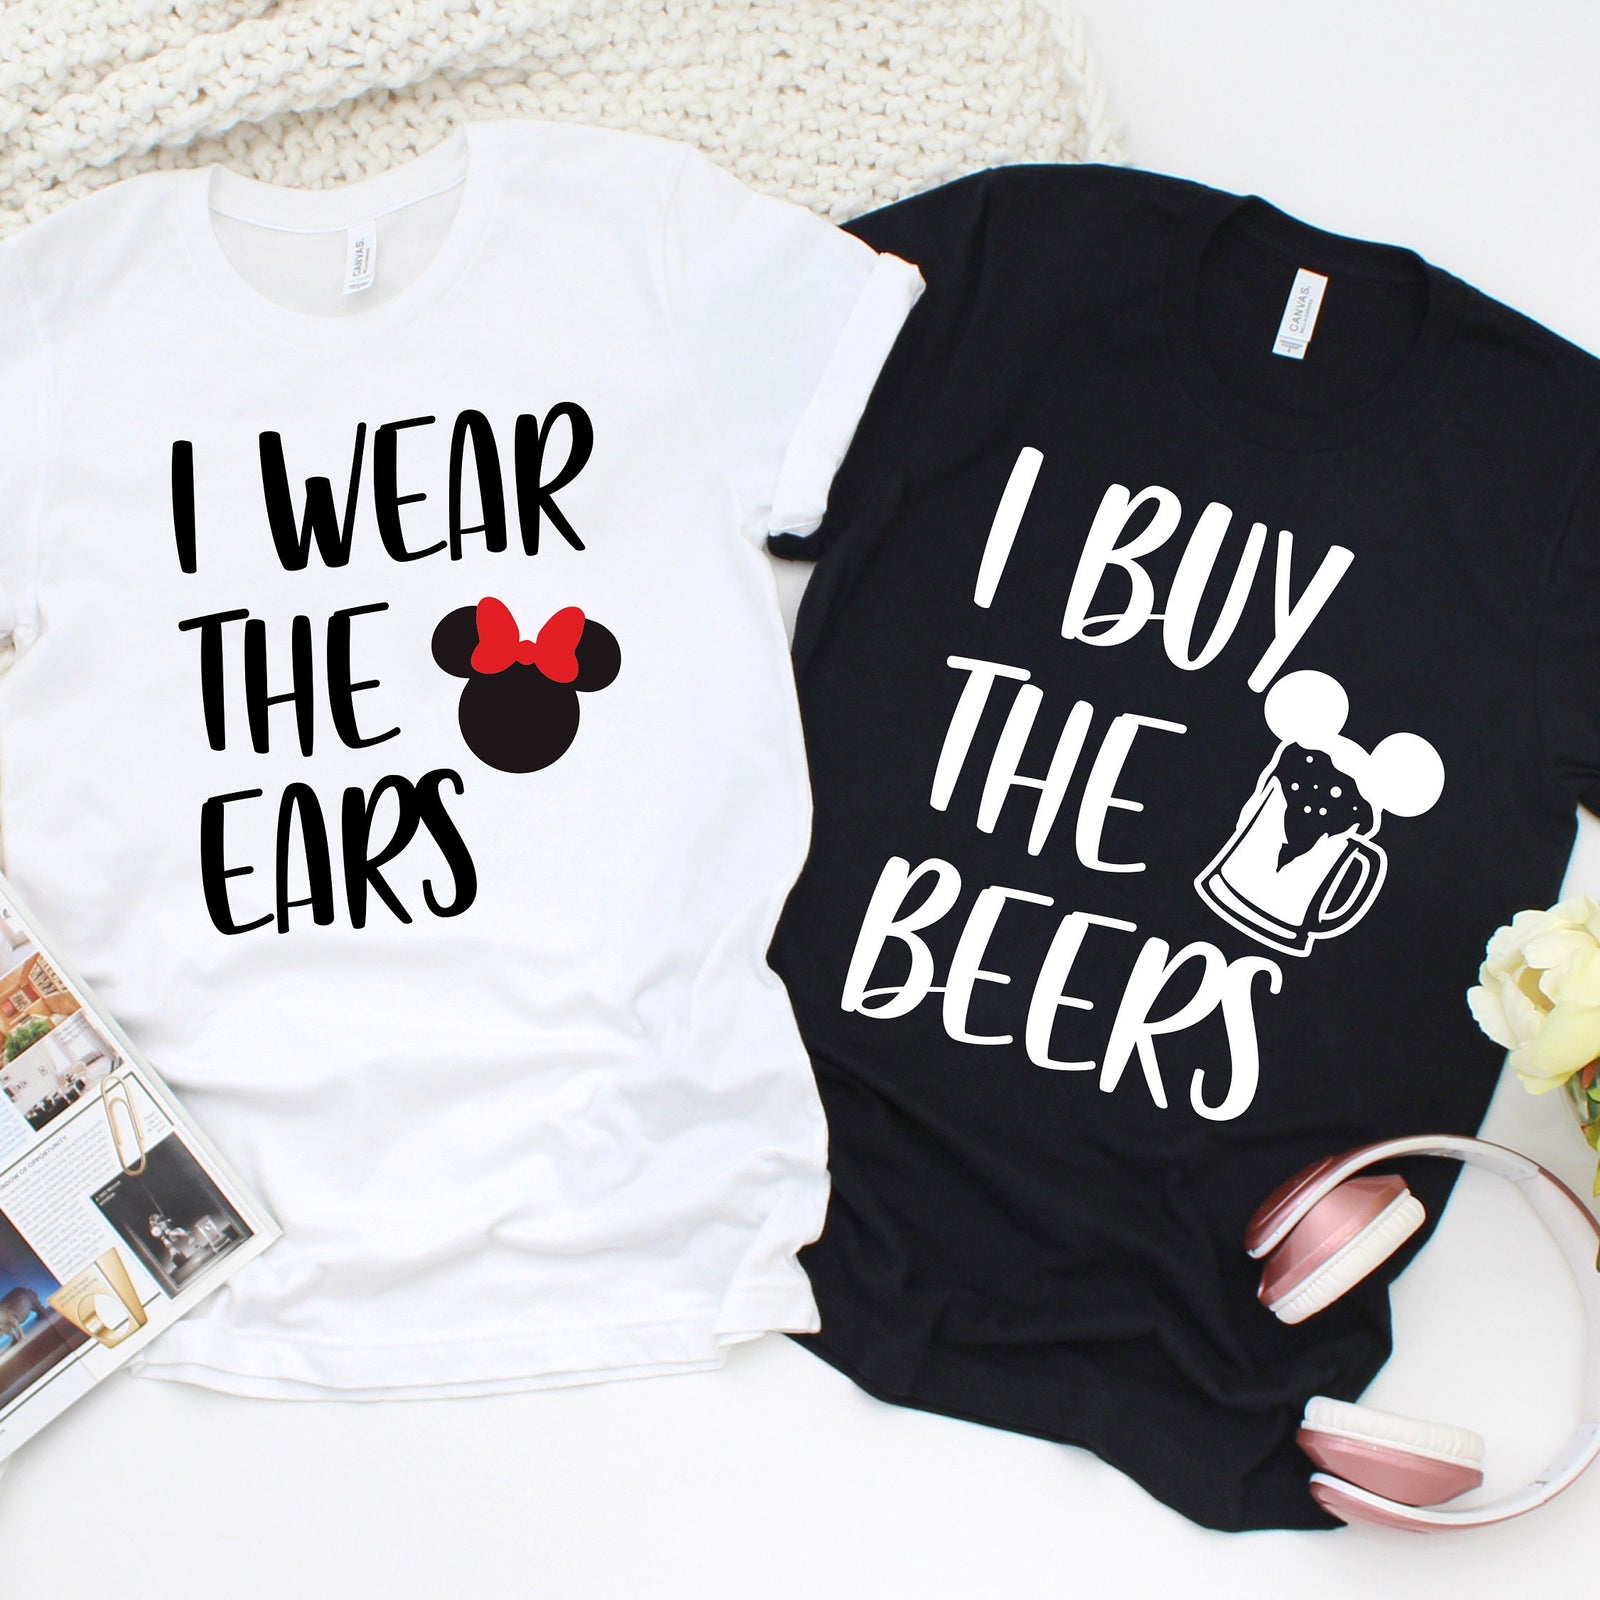 I wear the Ears - I Buy the Beers Matching Disney Shirts - Disney Couples - Matching Shirts